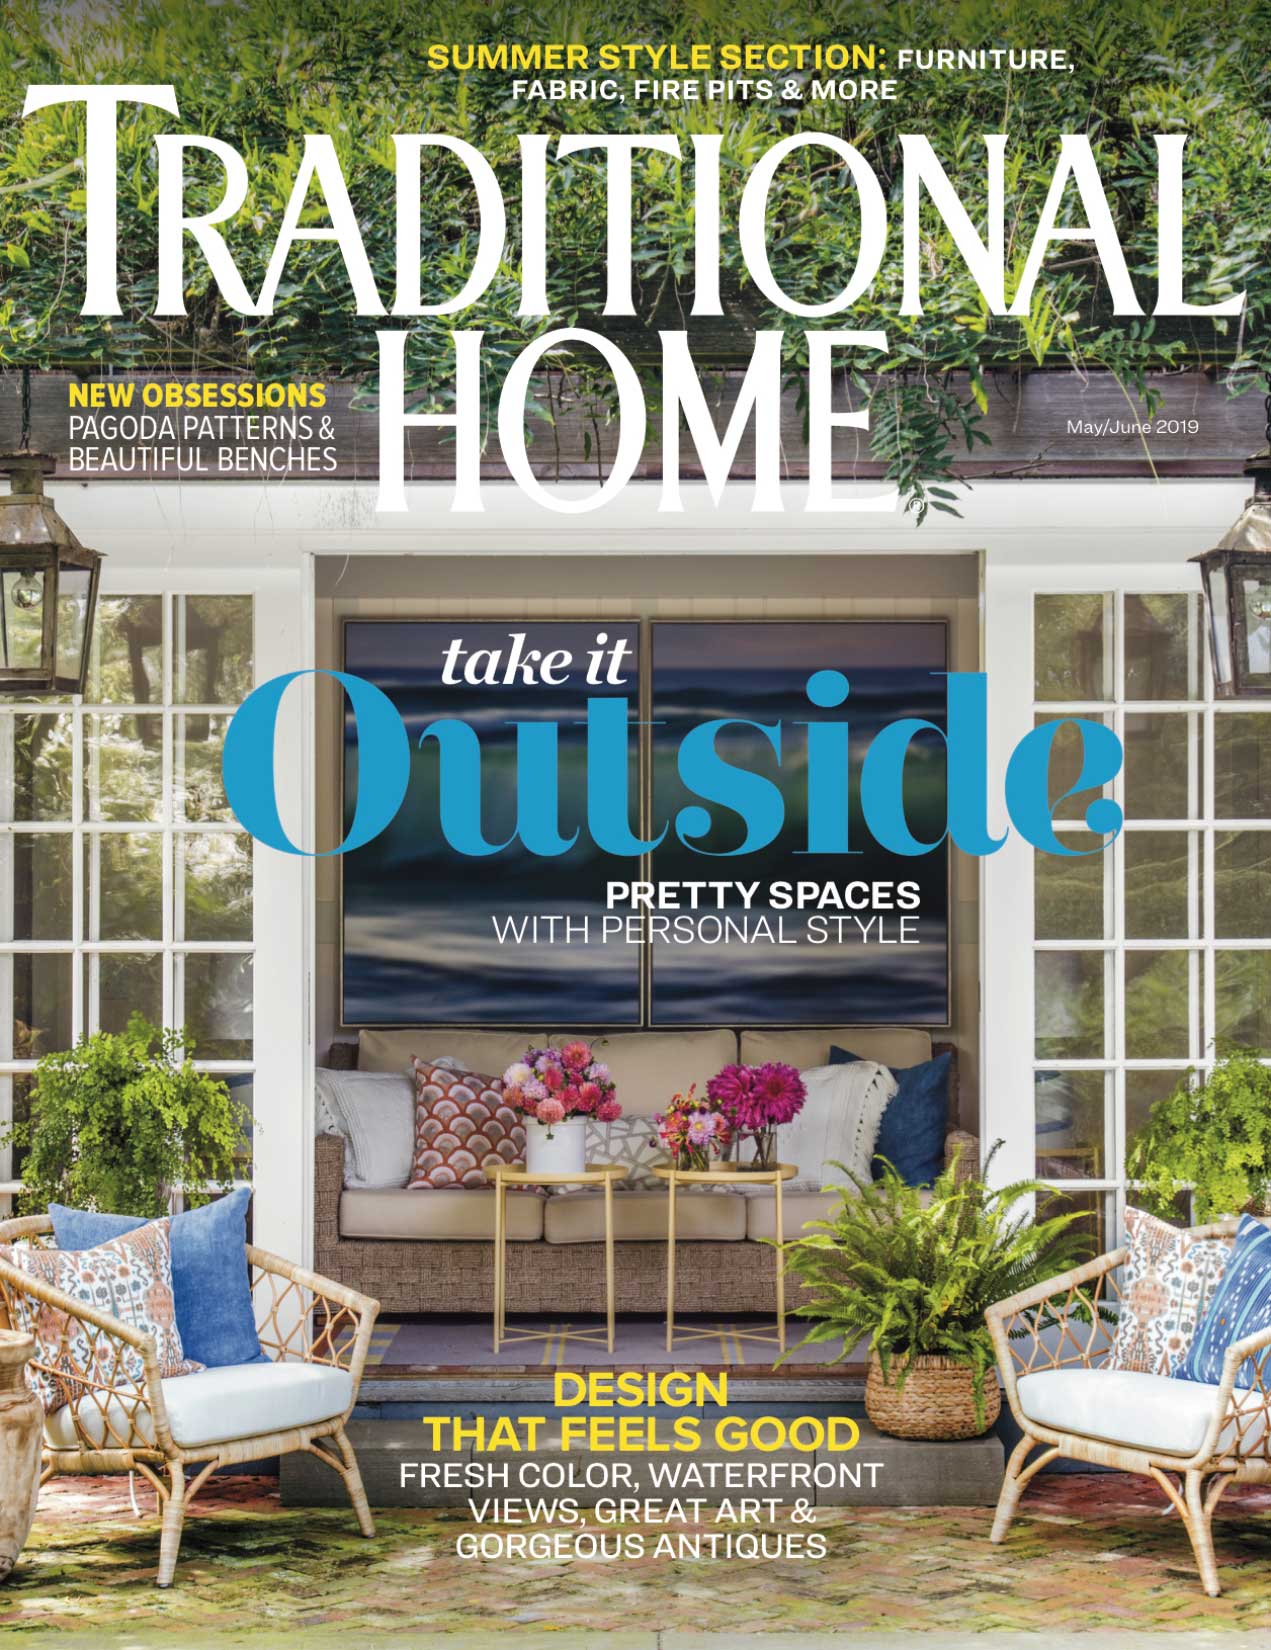 Traditional Home Century cover May June 2019